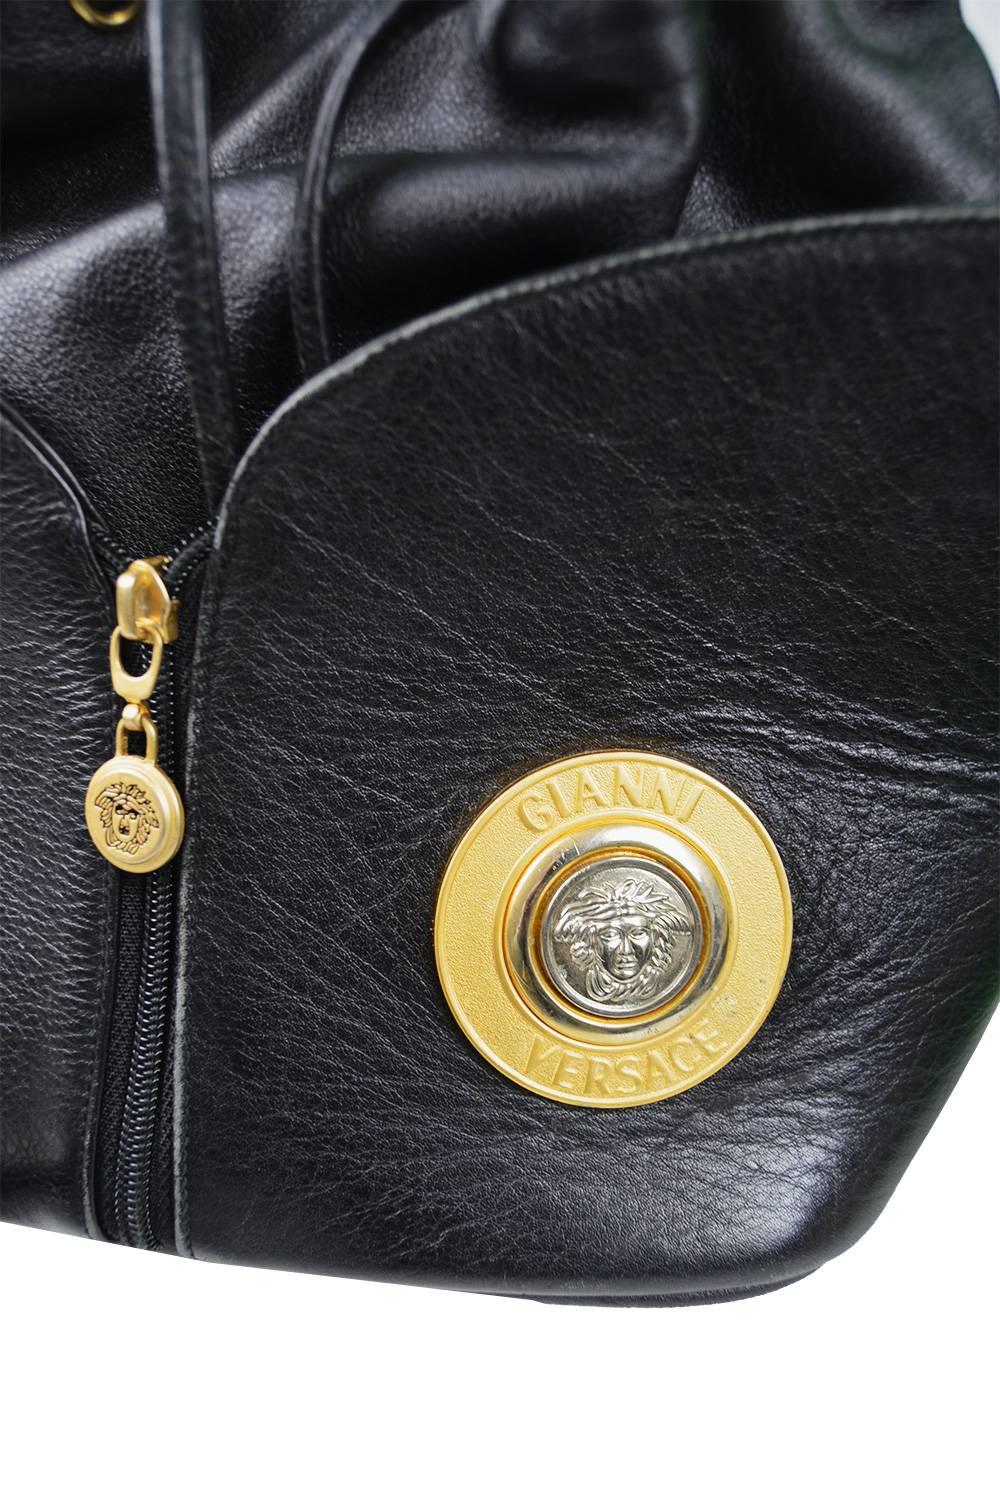 Gianni Versace Vintage 1990s Black Leather Gold & Silver Drawstring Shoulder Bag

Size: Width - 10” / 25cm
Height - 10” / 25cm
Depth - 6” / 15cm
Strap Drop - 17” / 43cm 

Condition: Excellent Vintage Condition - Light signs of wear commensurate with